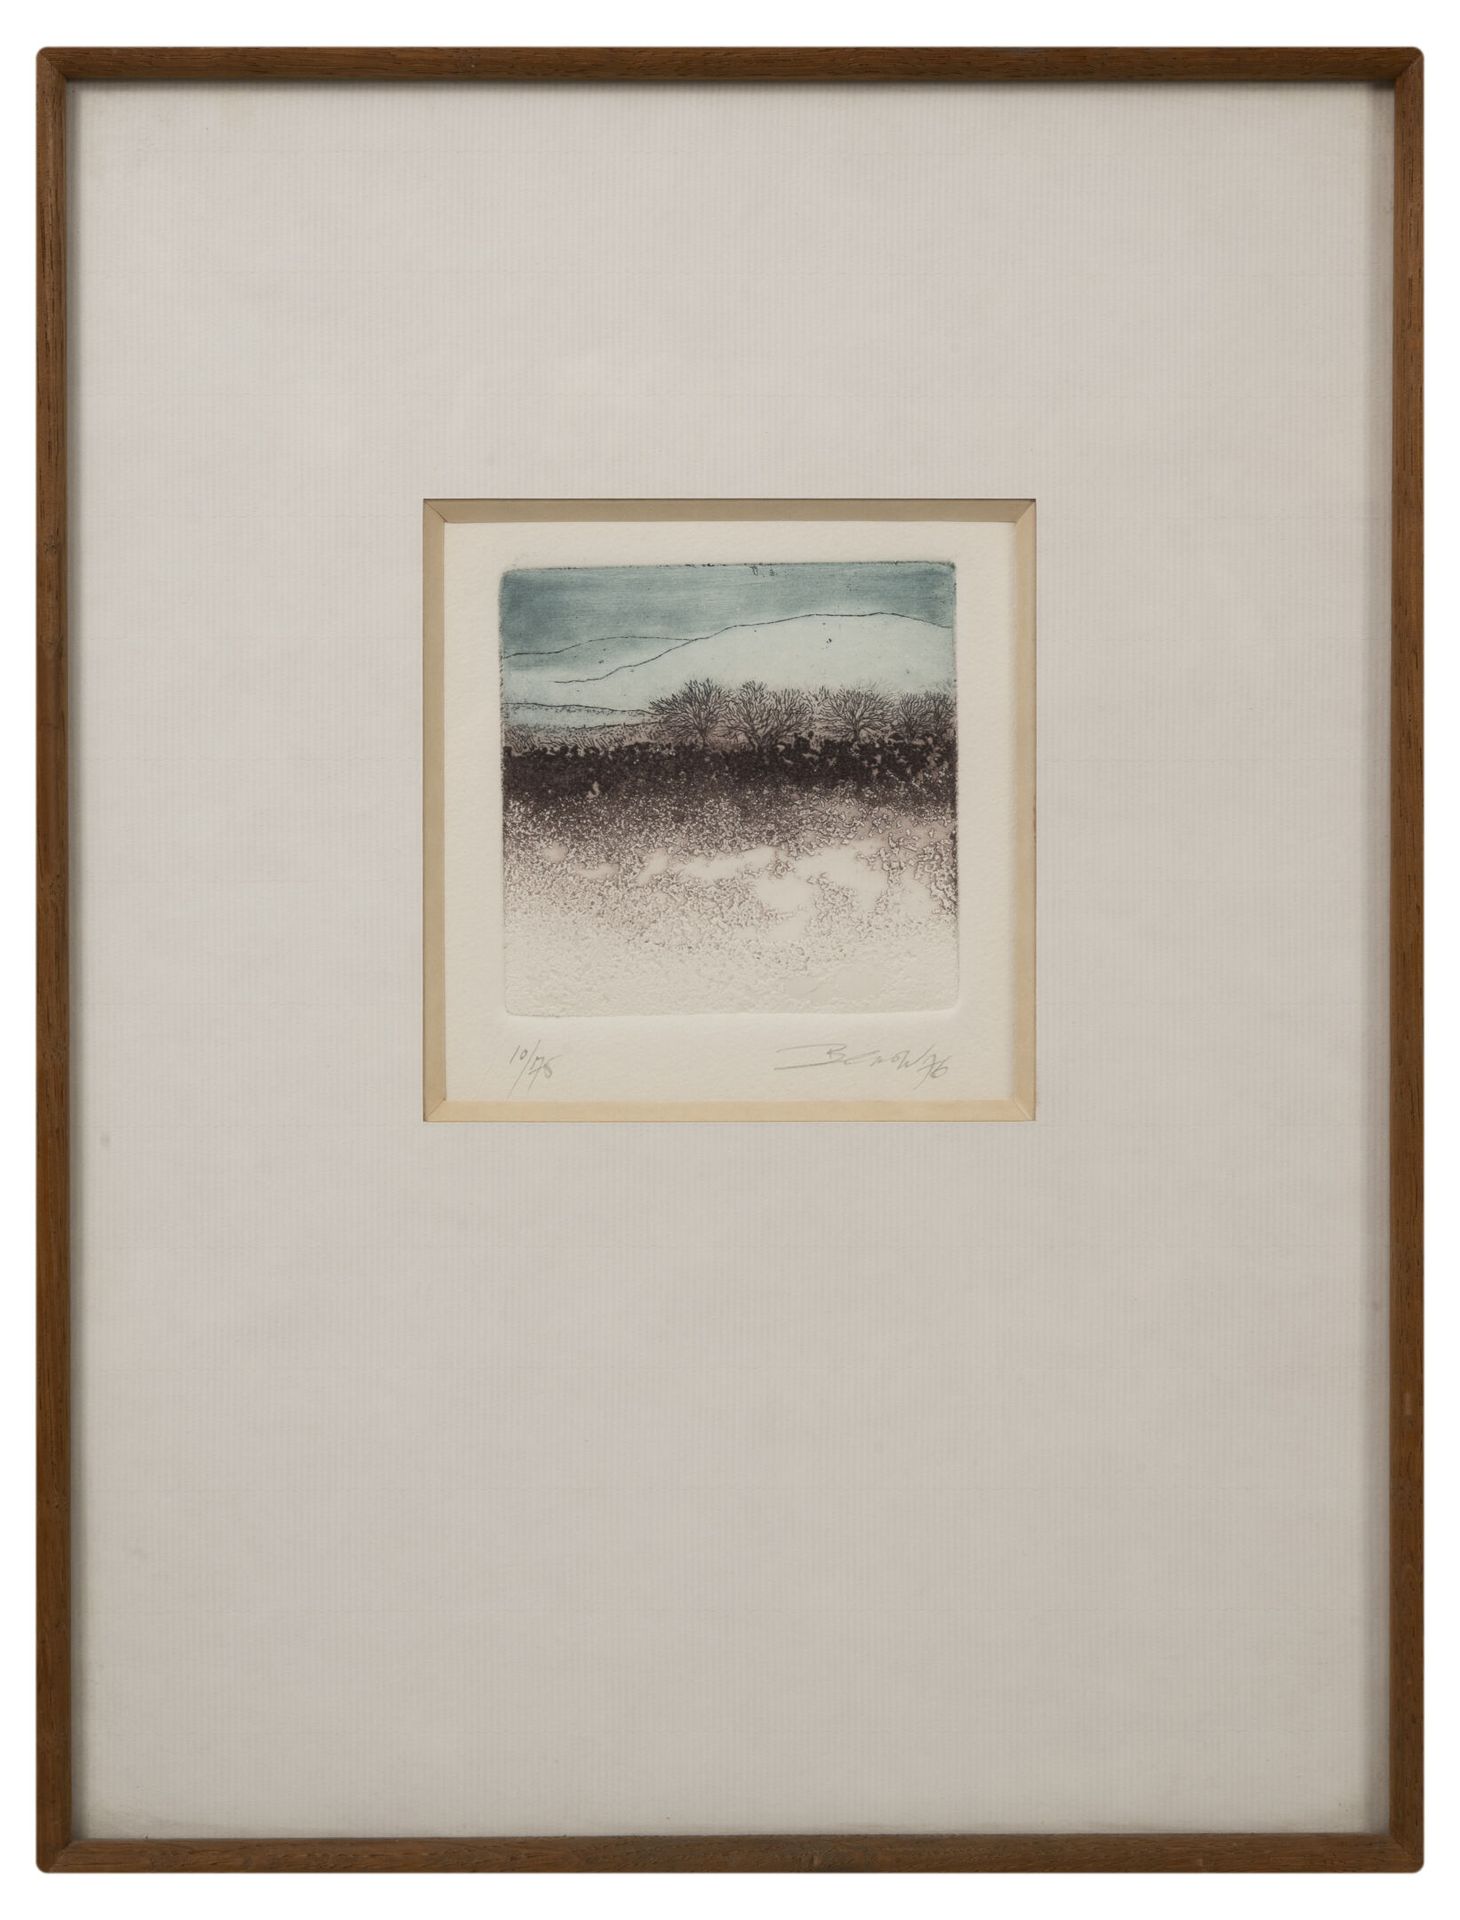 Sheila BENOW (1943) Landscape, 1976.

Etching in colours on paper.

Signed and d&hellip;